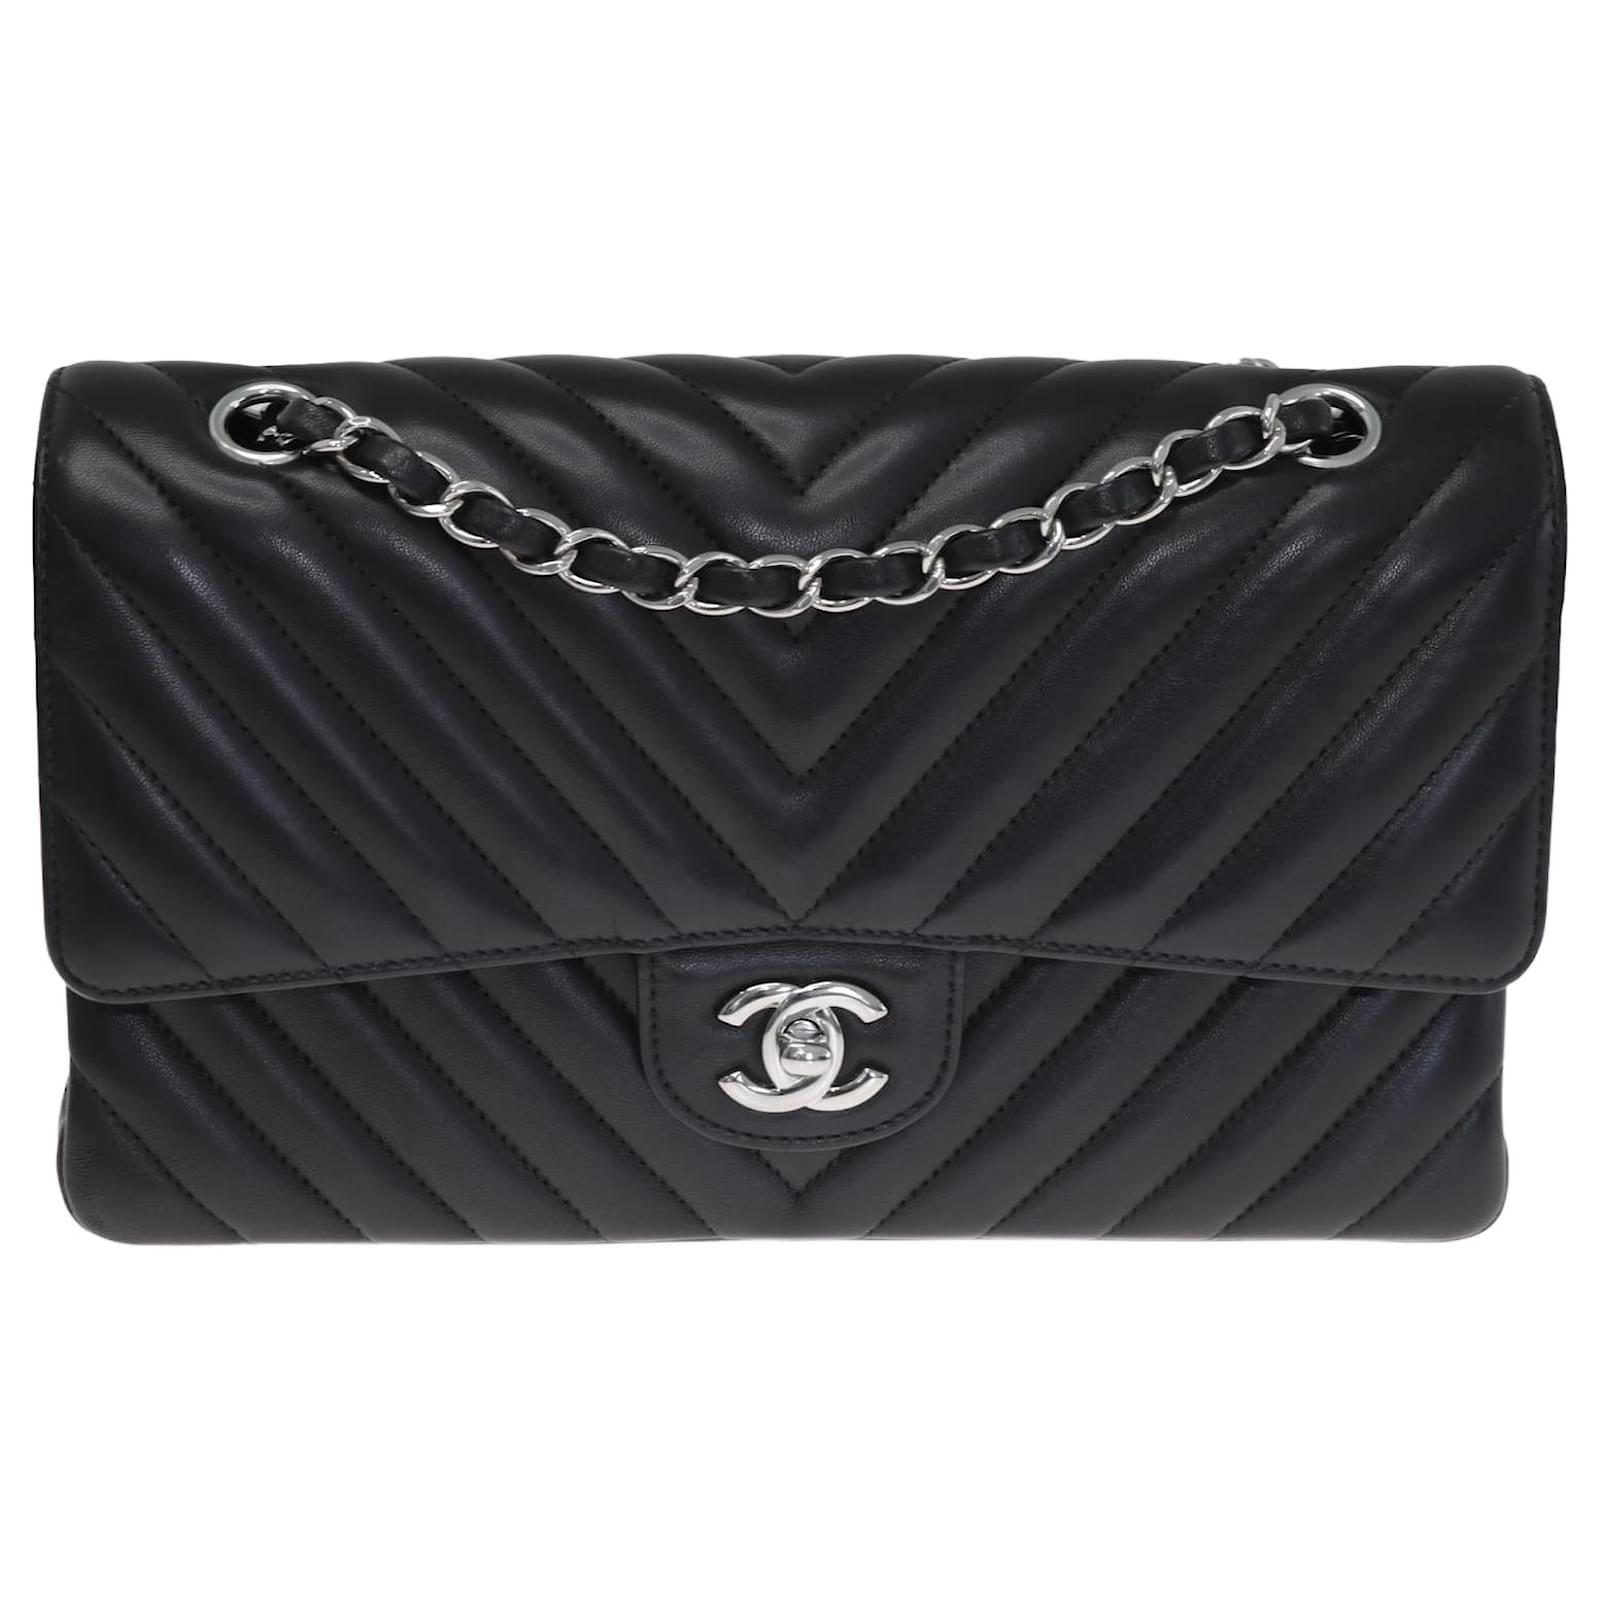 Chanel Black Chevron Quilted Medium lined Large CC Flap Bag